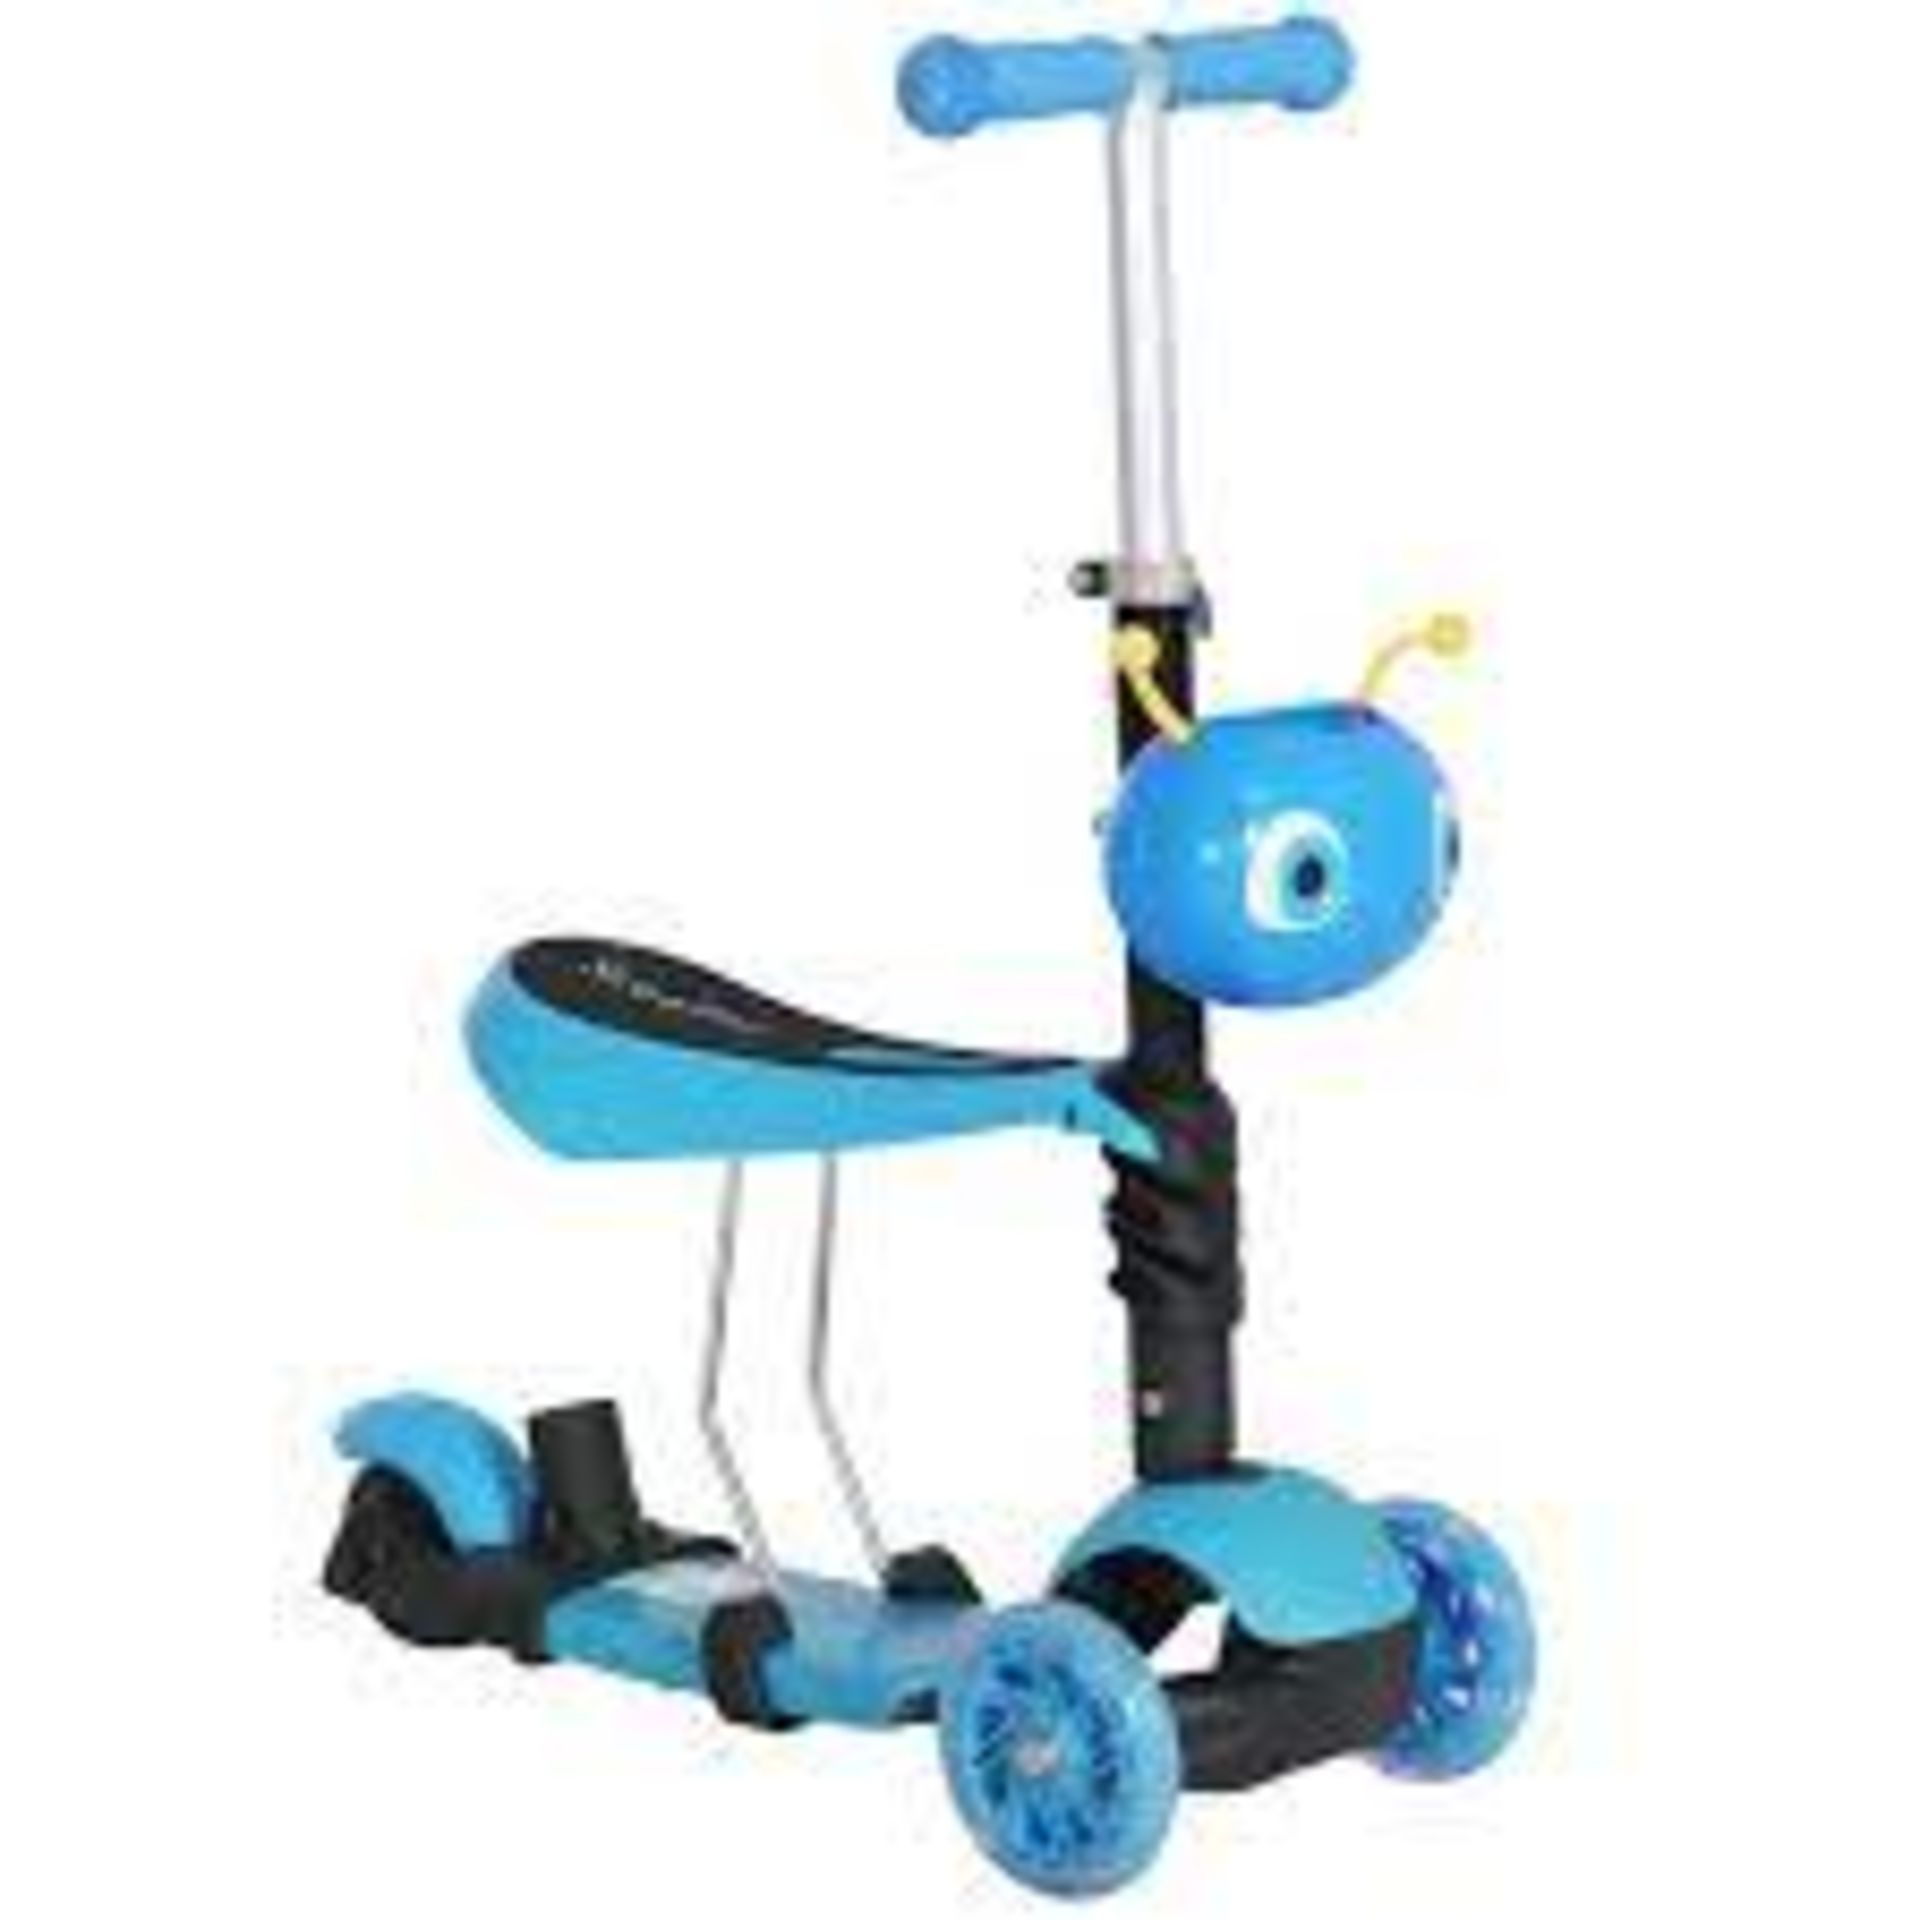 5-in-1 Kids Kick Scooter W/Removable Seat-Blue. - SR4. MULTI-FUNCTION: With removable seat and